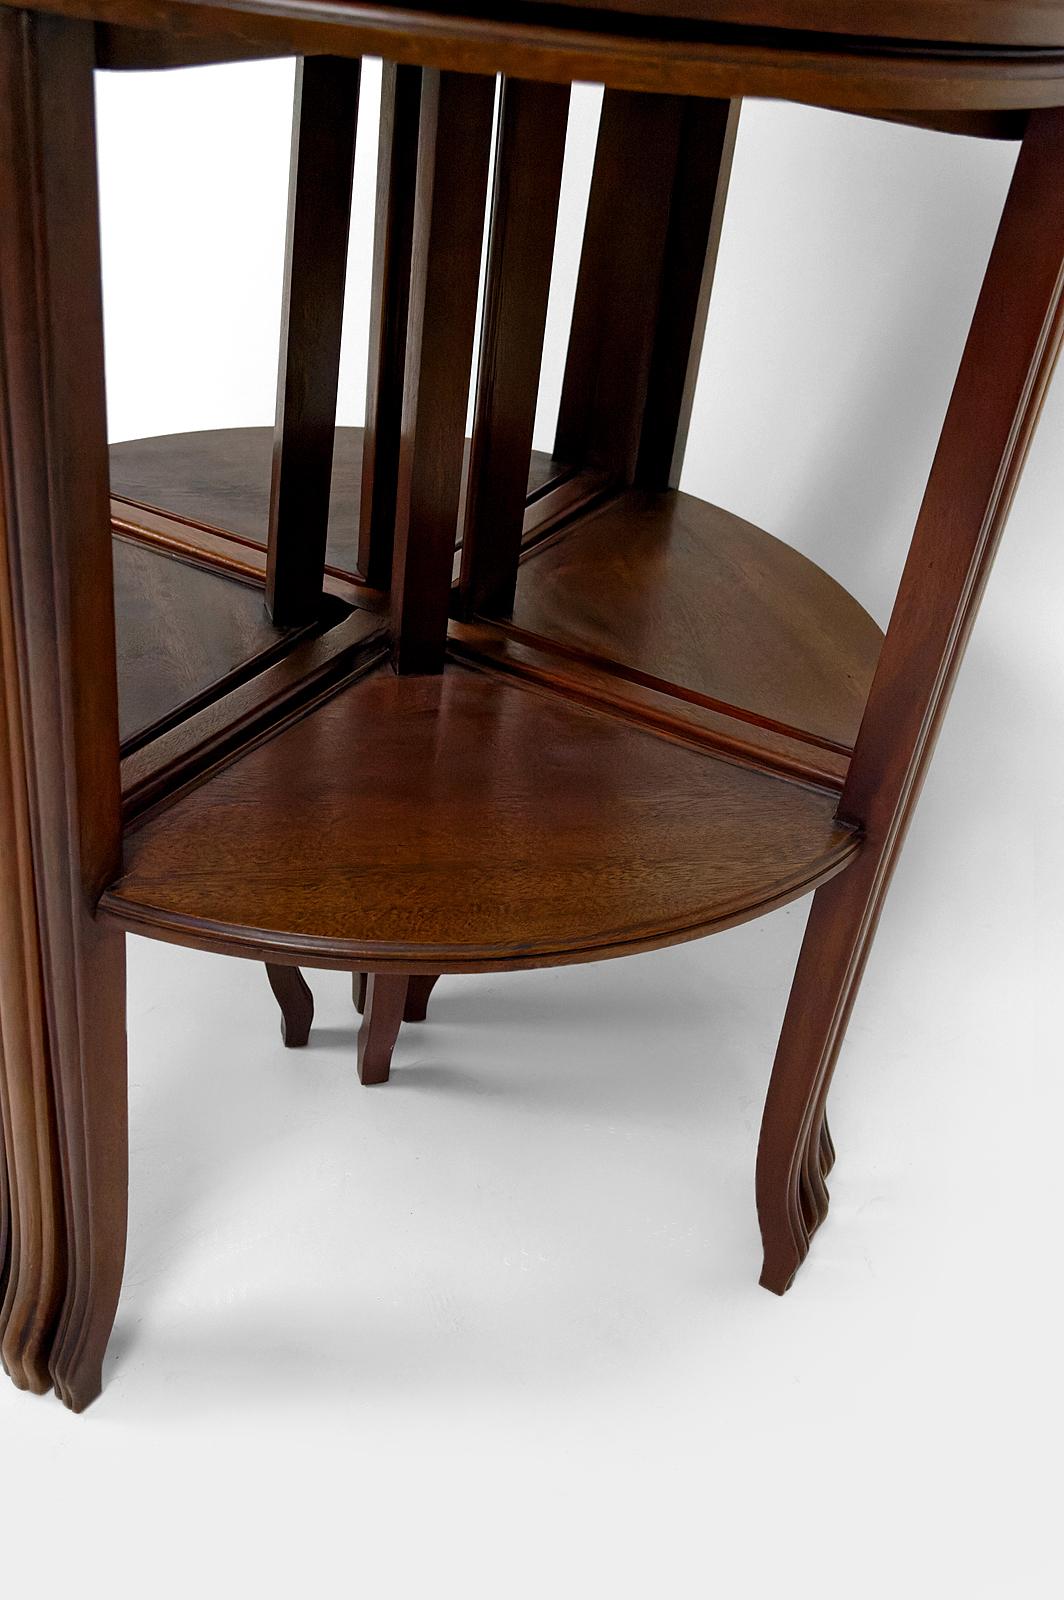 Serving table / nesting tables convertible into 2 side tables, Art Nouveau, 1910 For Sale 1